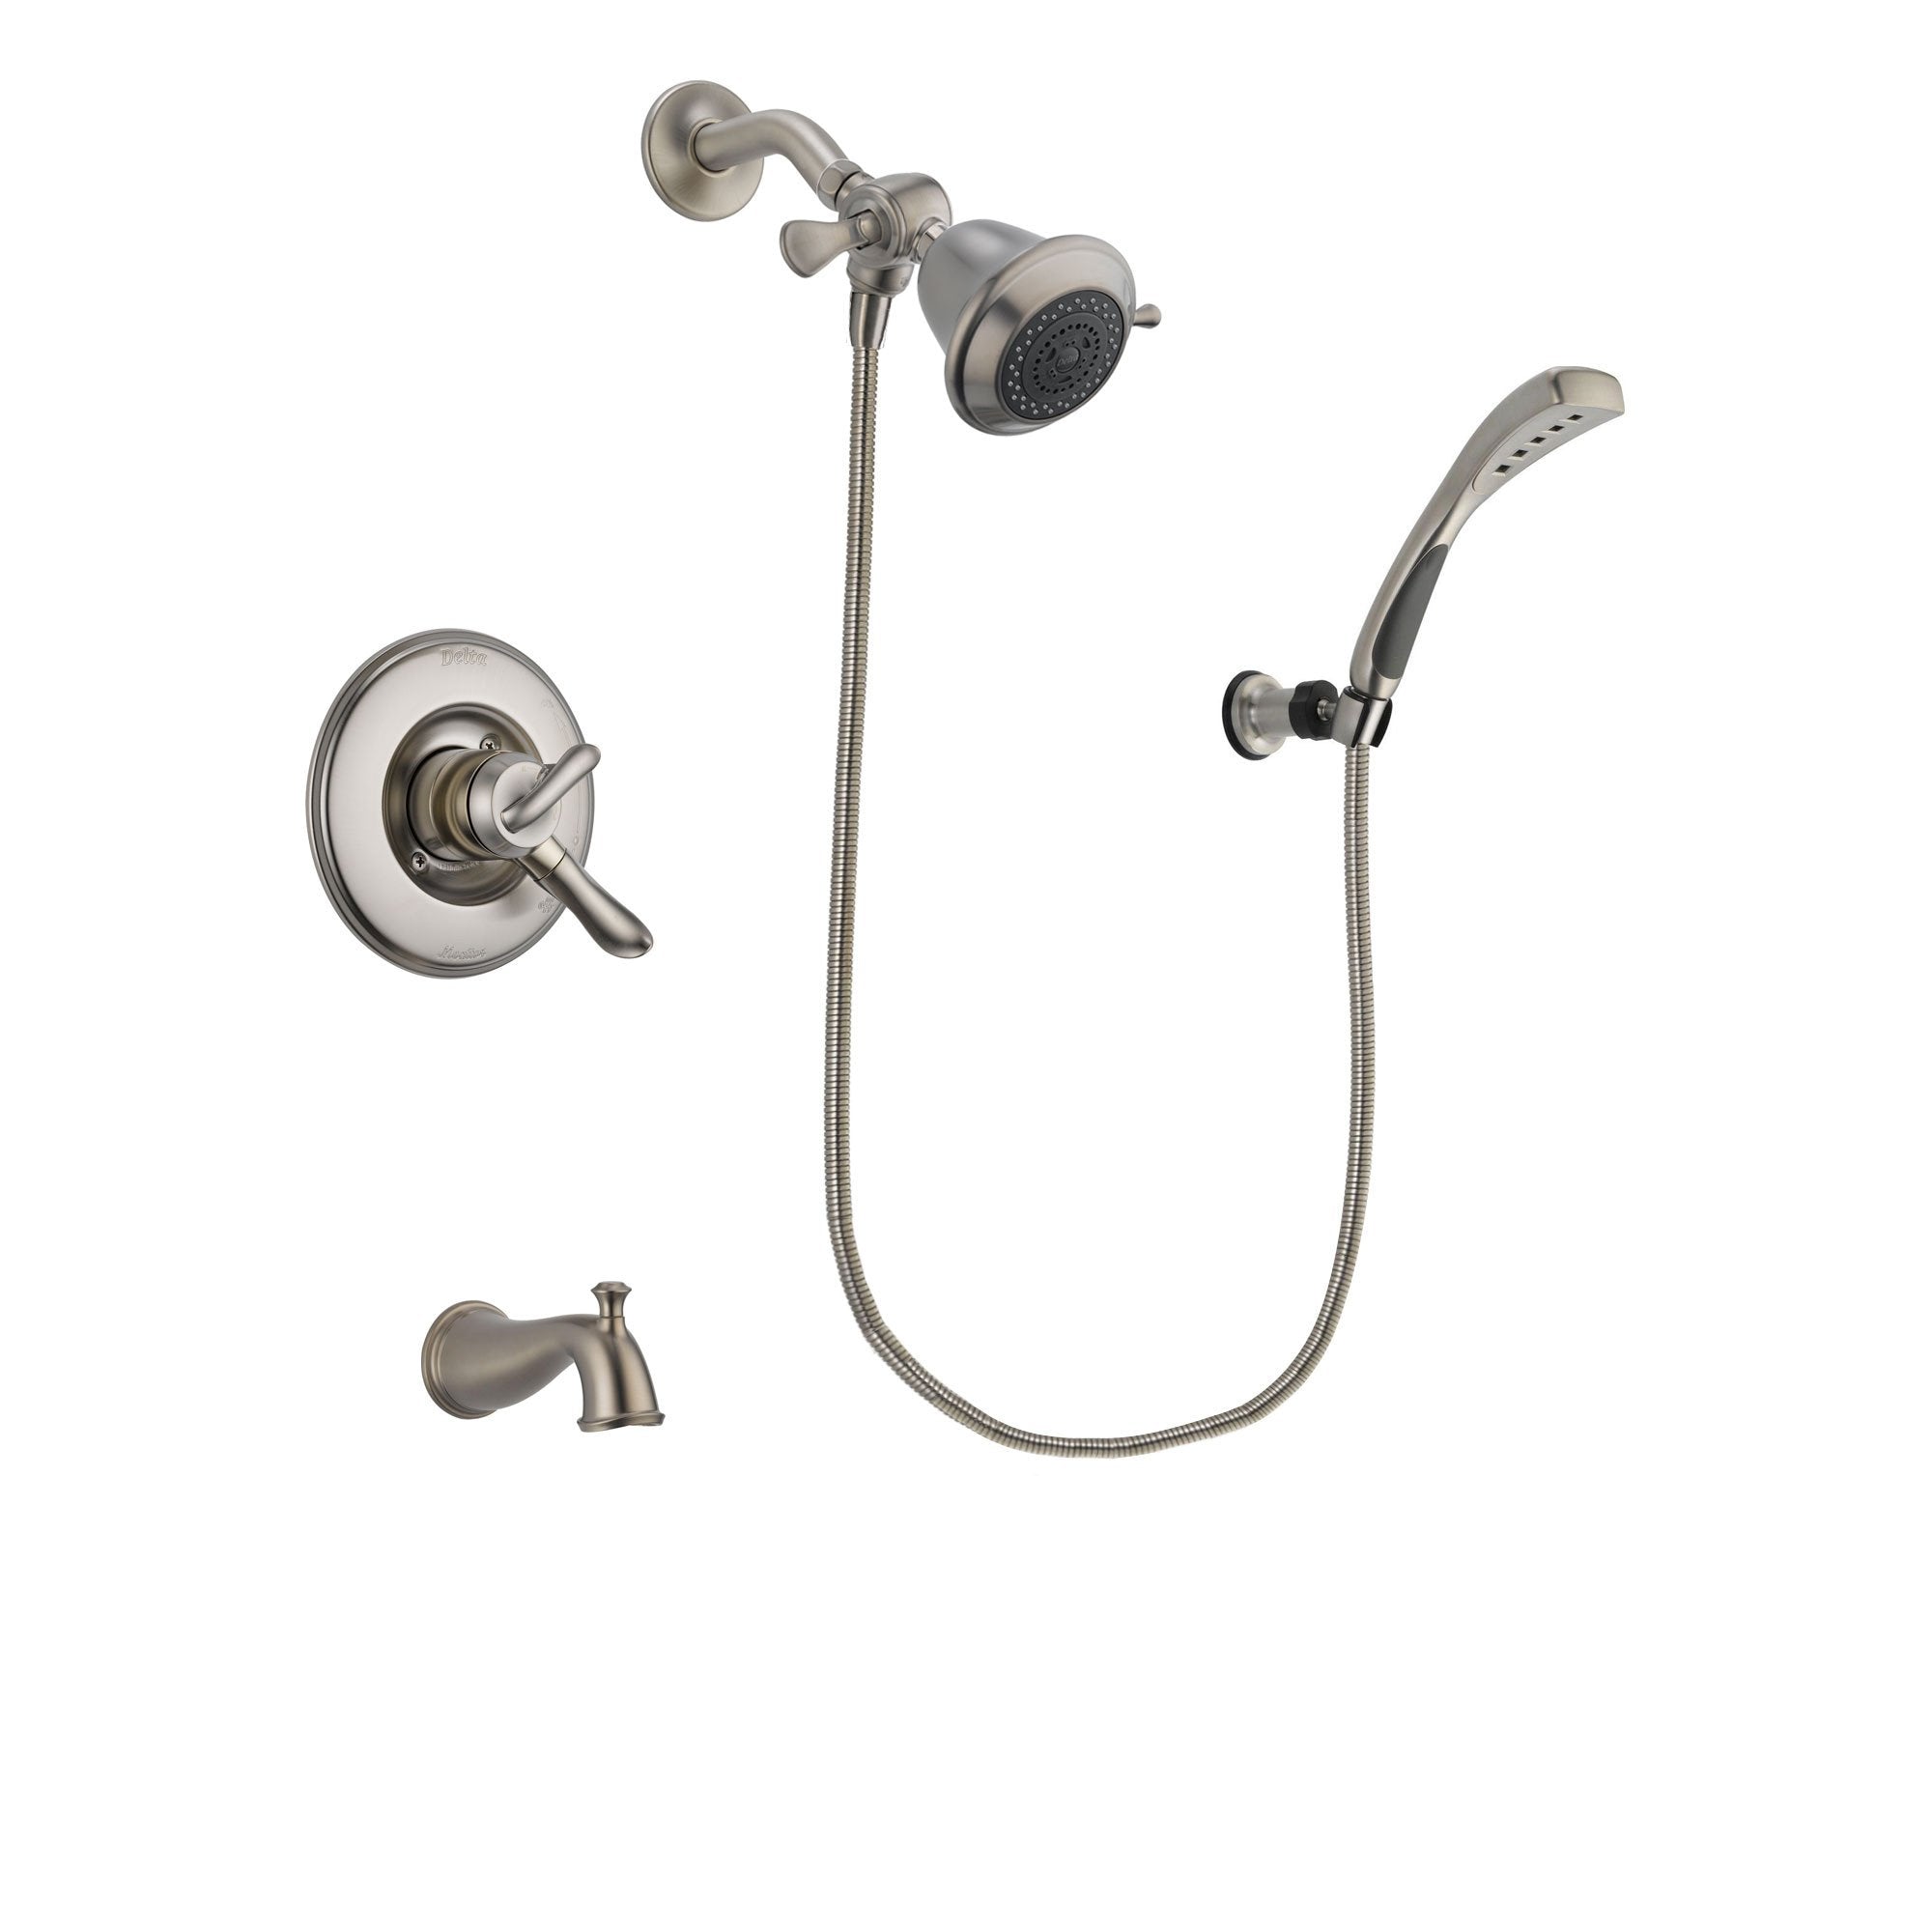 Delta Linden Stainless Steel Finish Dual Control Tub and Shower Faucet System Package with Shower Head and Wall Mounted Handshower Includes Rough-in Valve and Tub Spout DSP1815V